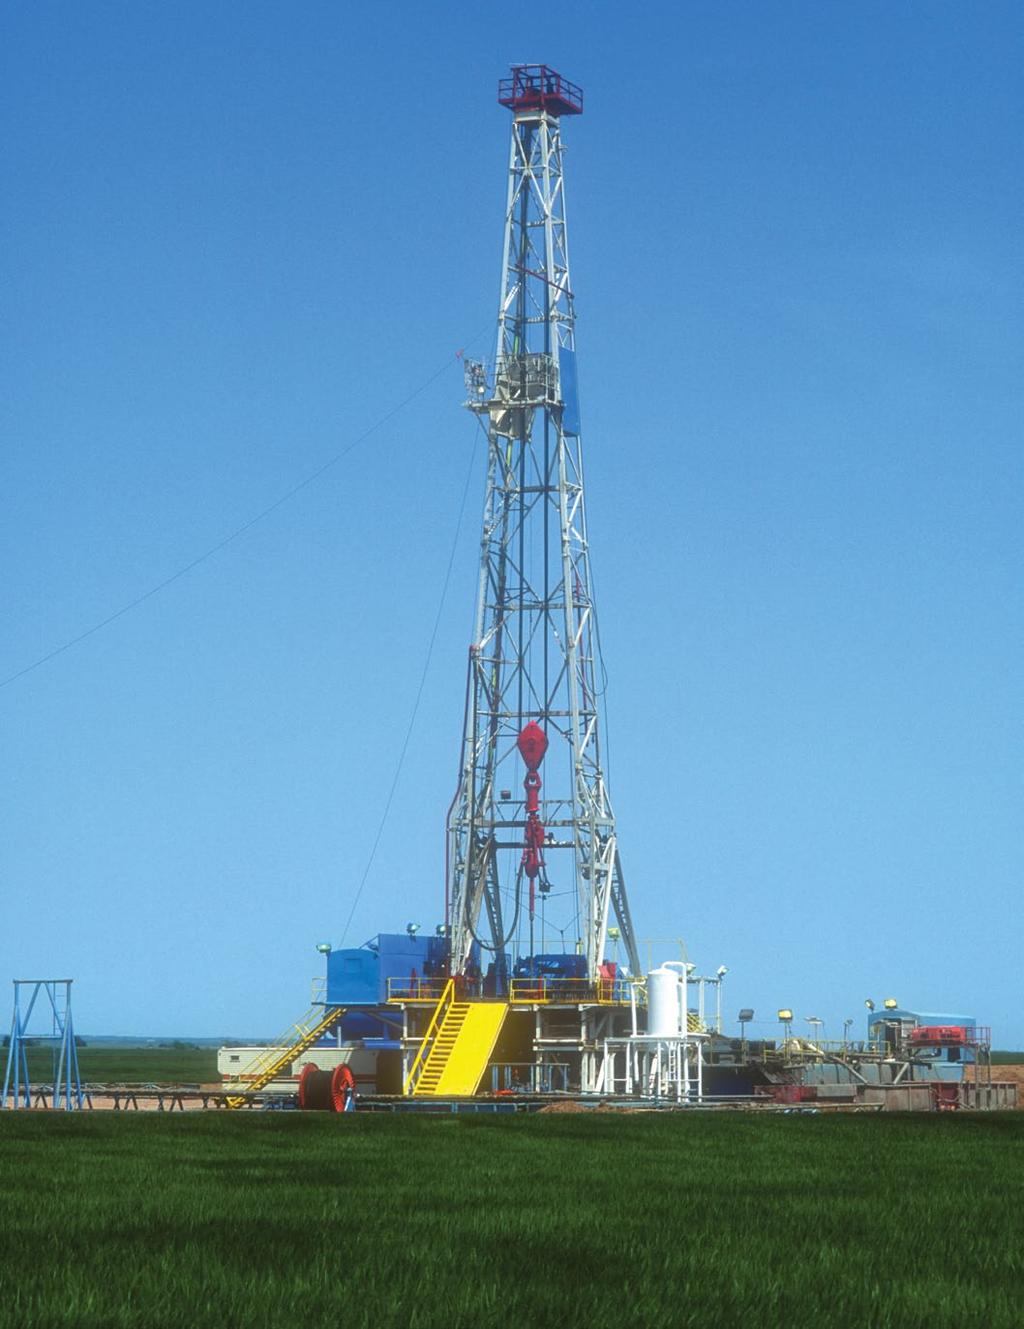 Unconventional Resources Unconventionals providing innovative solutions to new challenges AGR has positioned itself to extend its subsurface experience to support shale gas/oil, Carbon Capture and